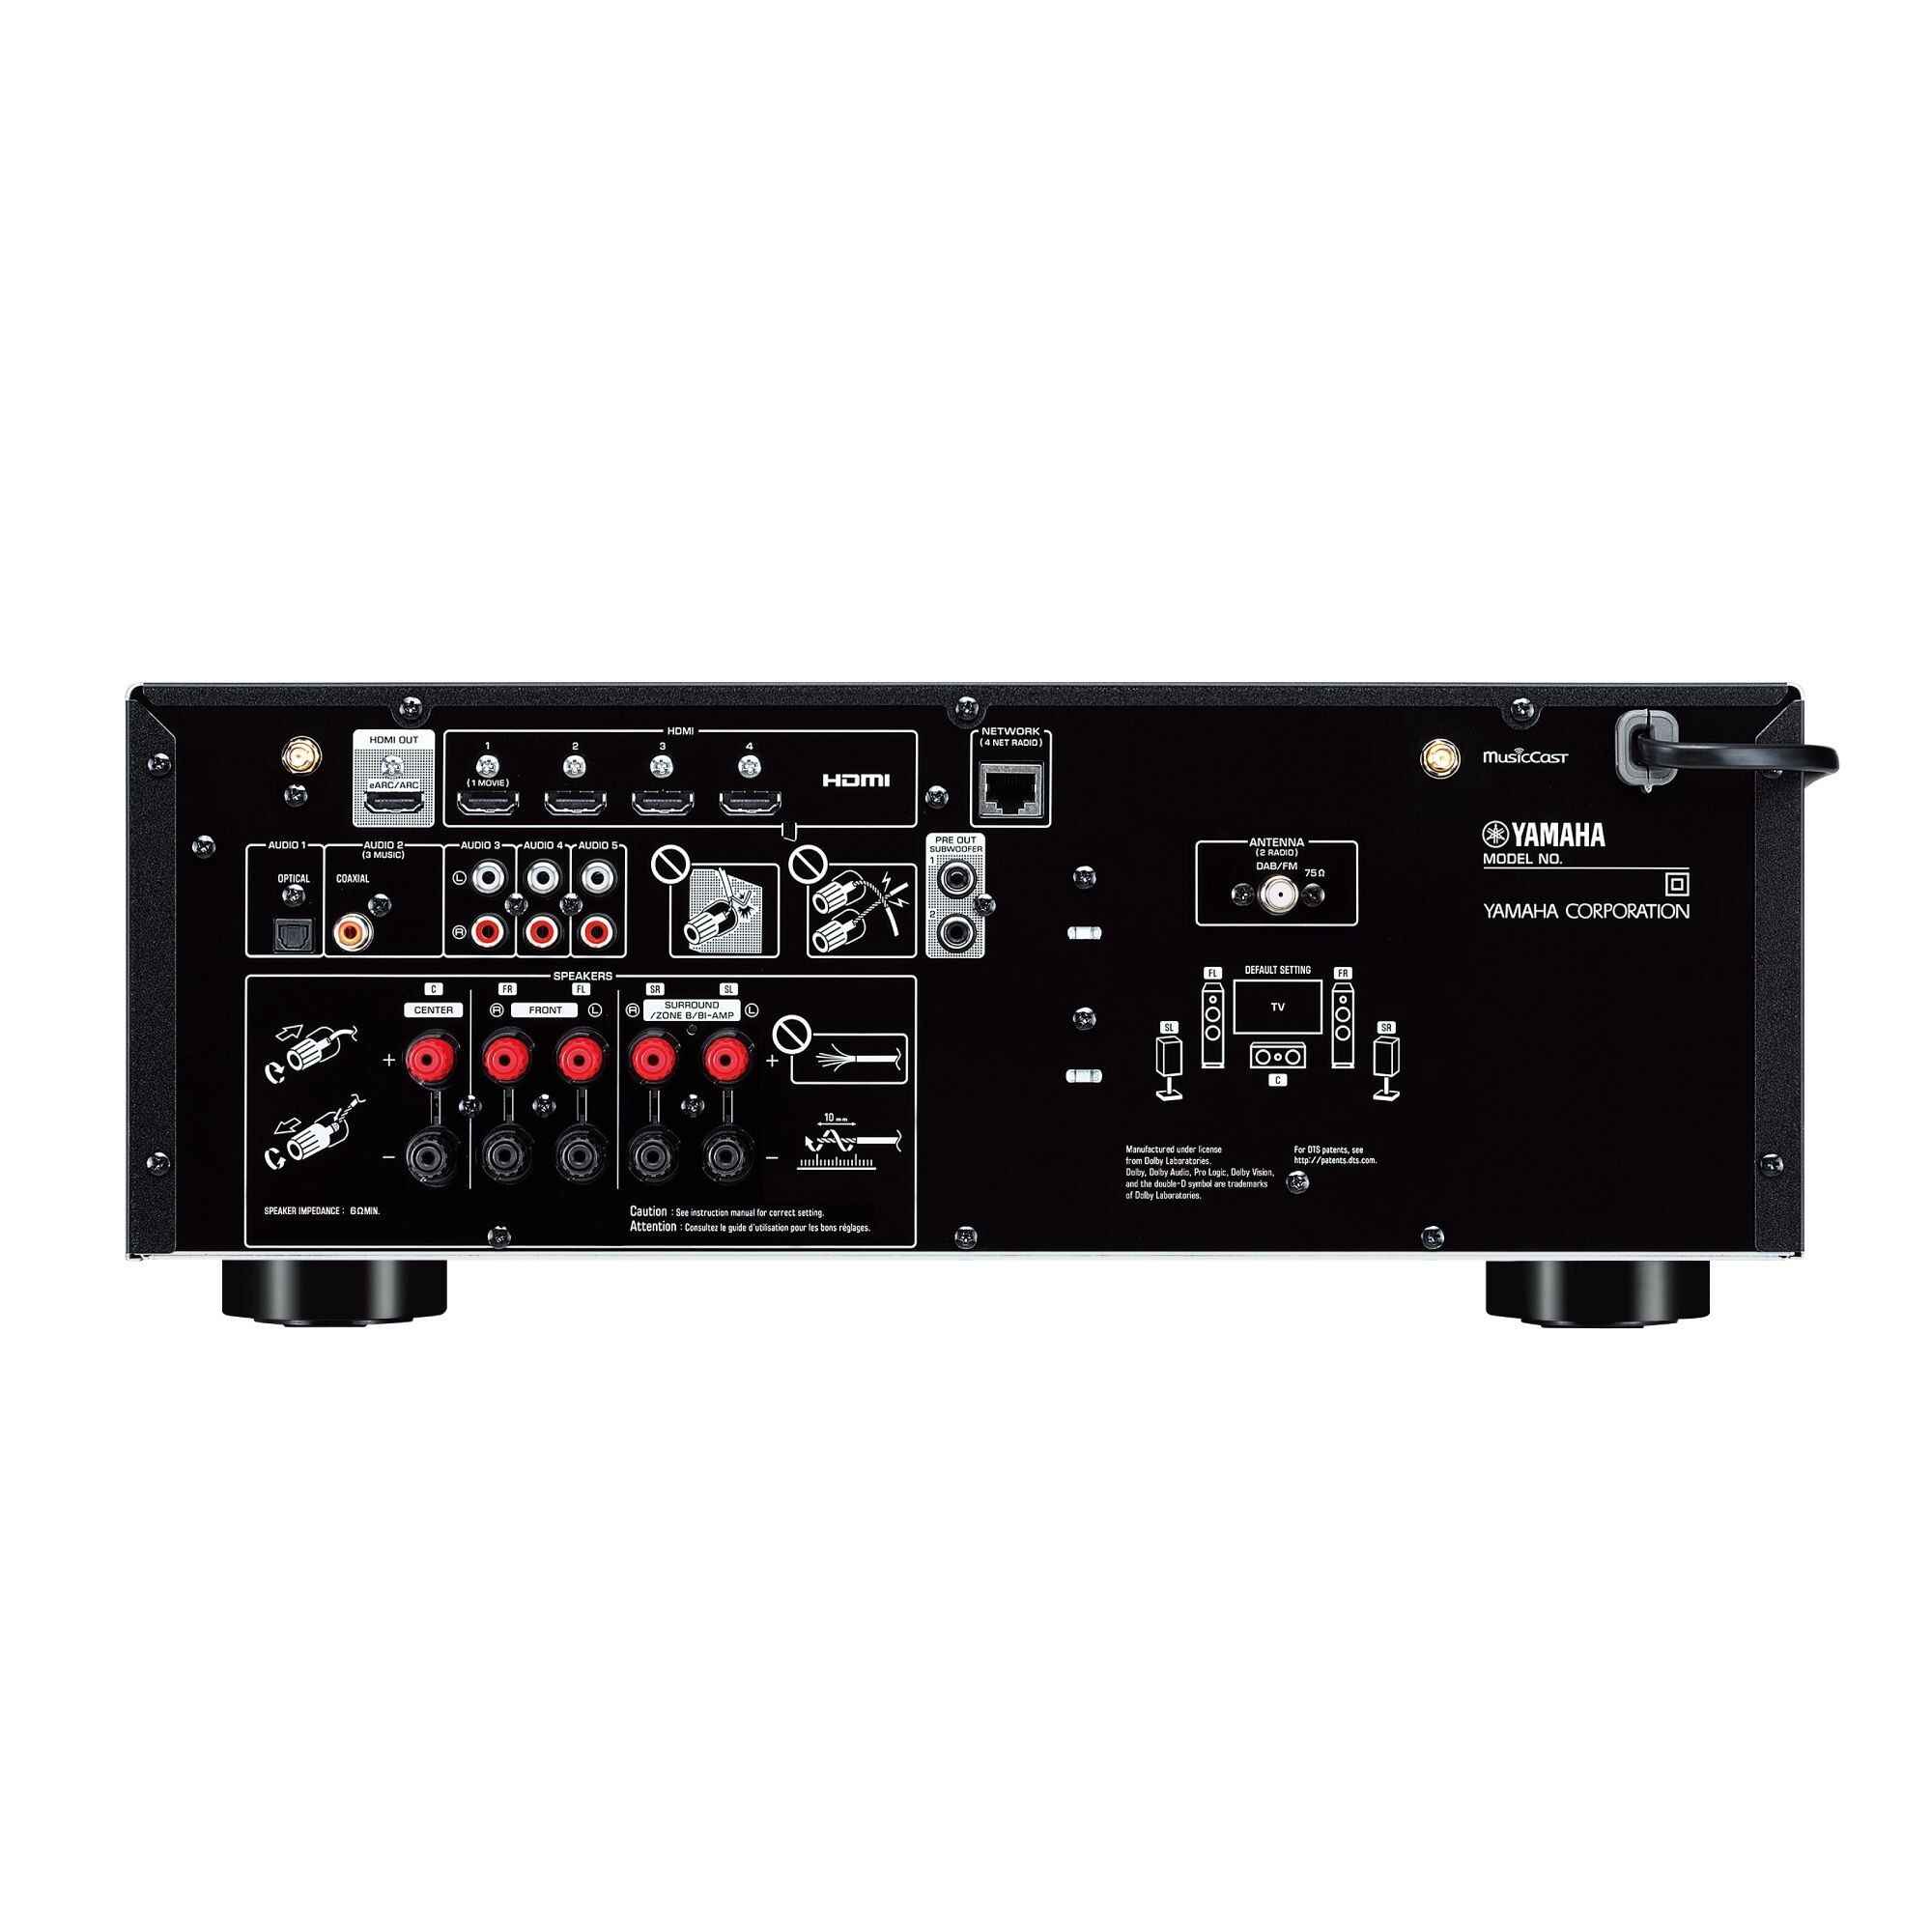 Yamaha-RX-V4A-5-1-Kanal-AV-Receiver-mit-CINEMA-DSP-3D-HDMITM-4-in-1-out-wireless-surround